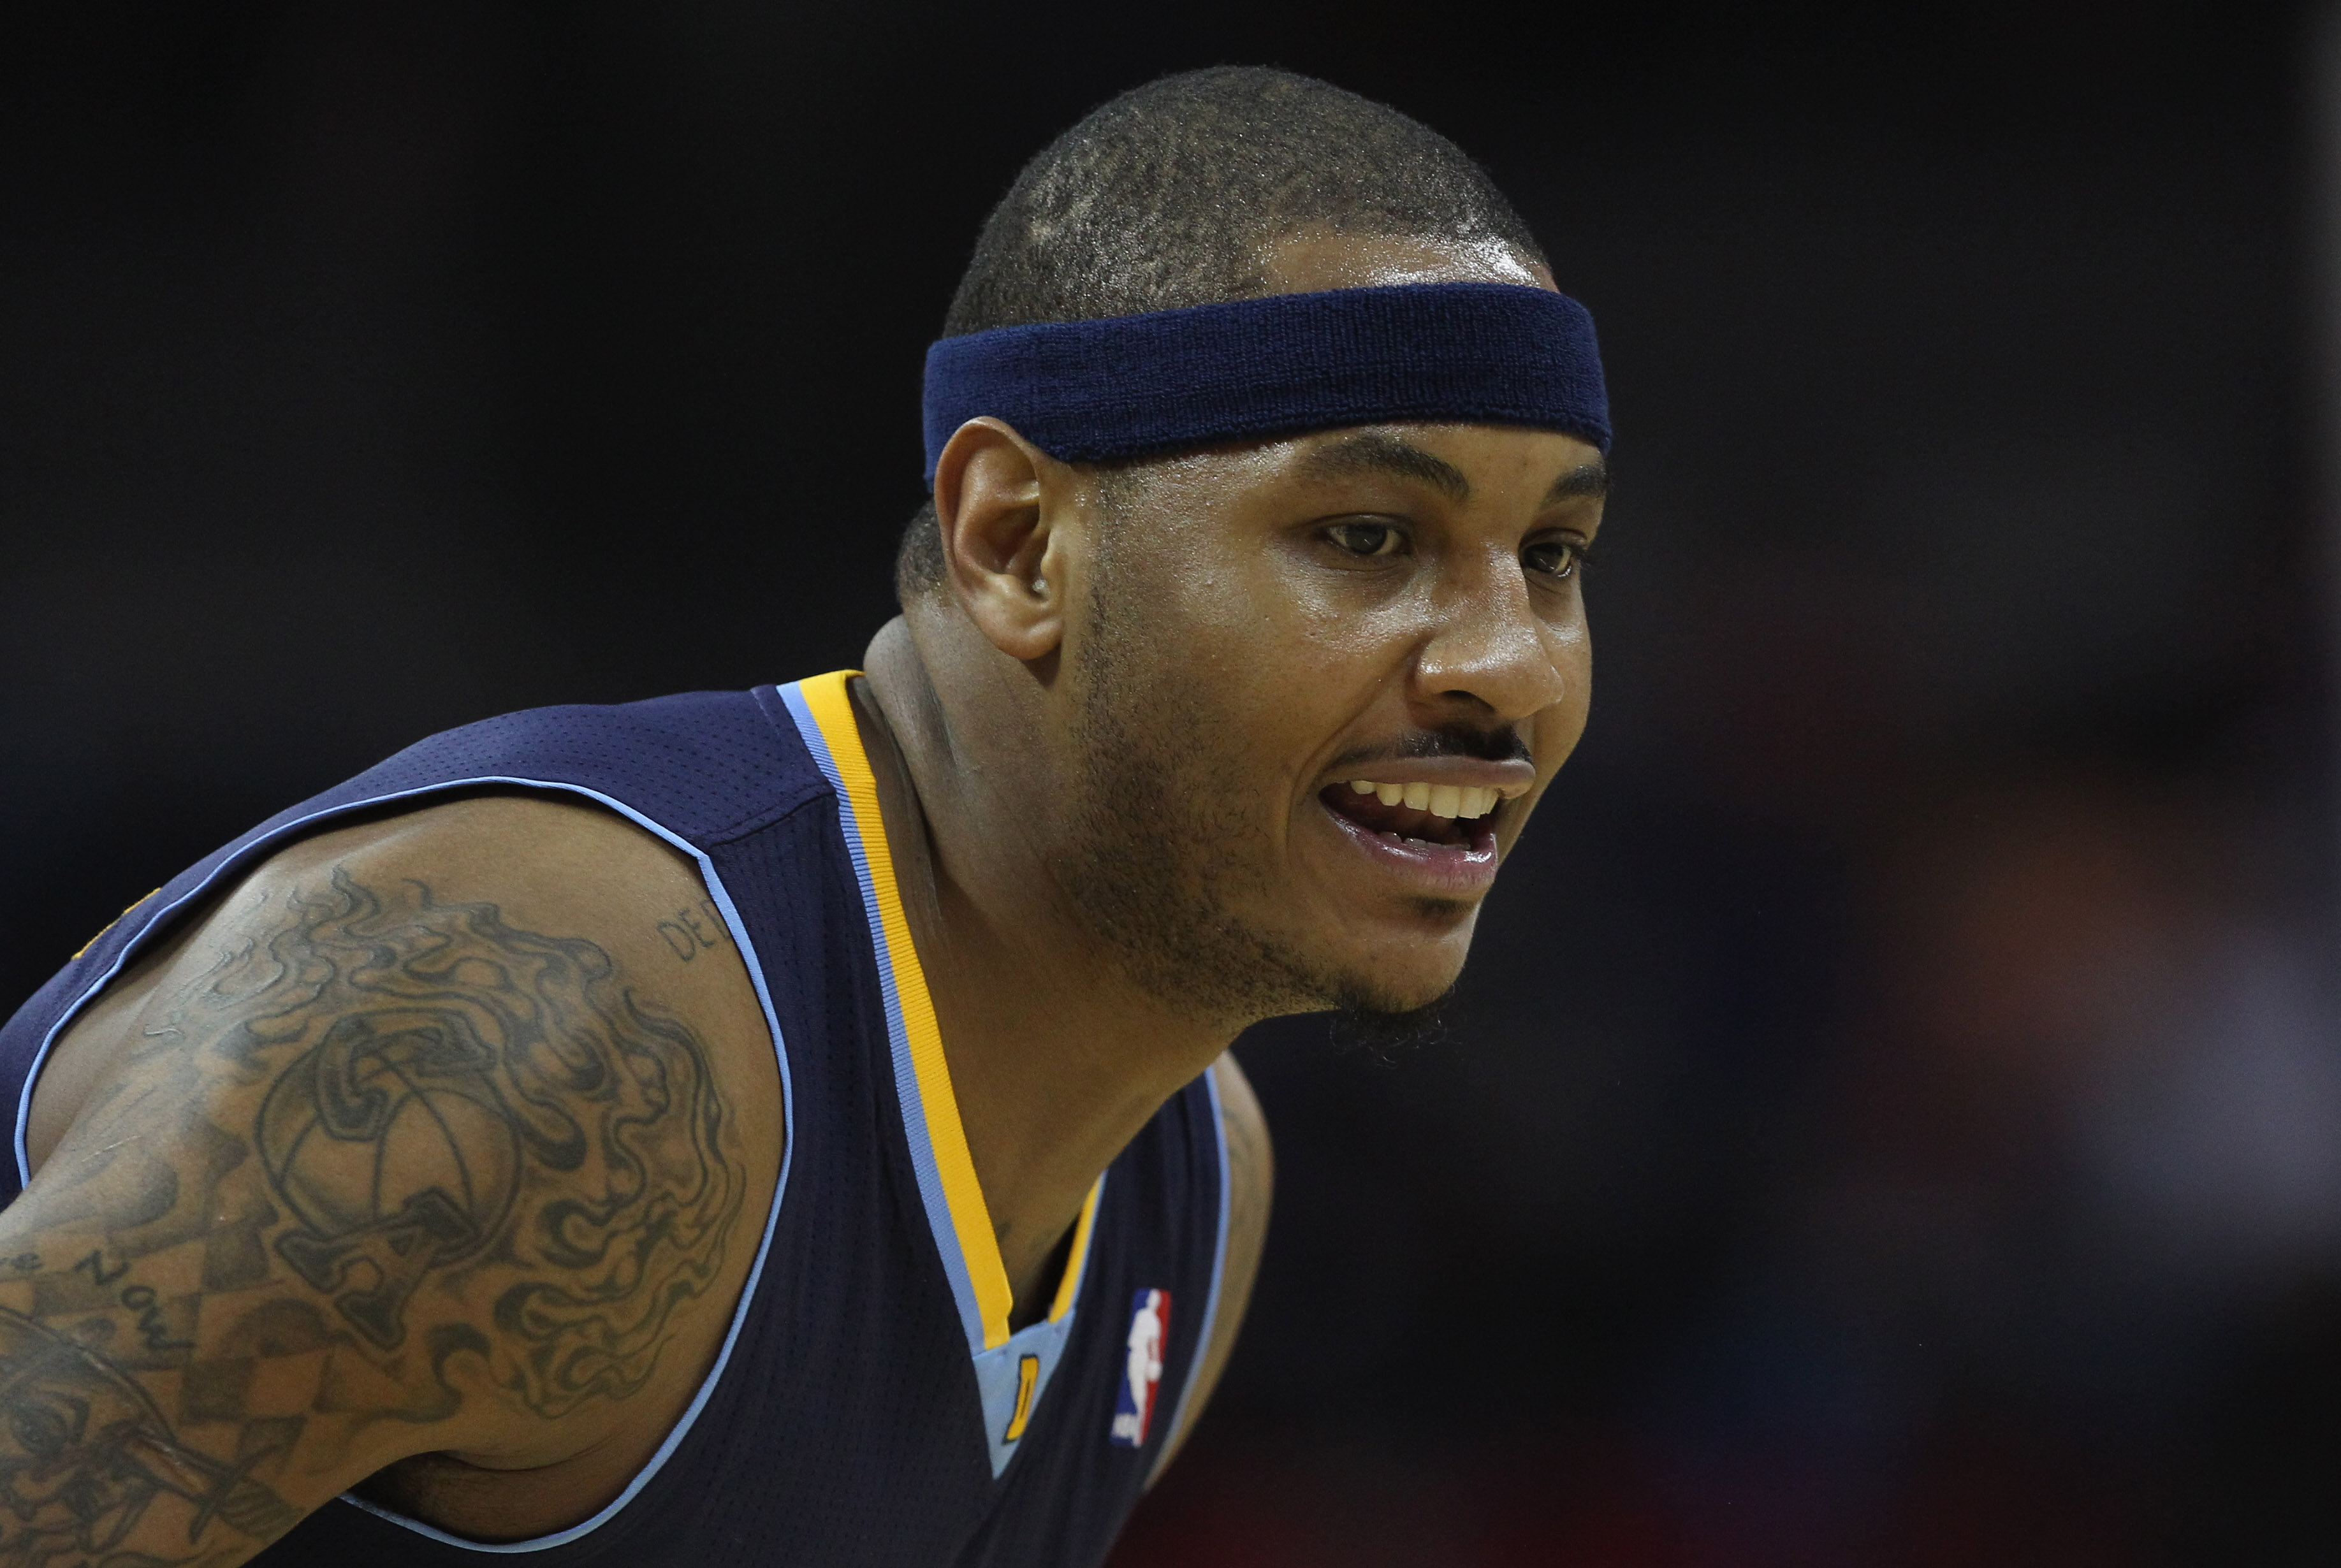 A Look at Recent Precedents for a Carmelo Anthony Trade